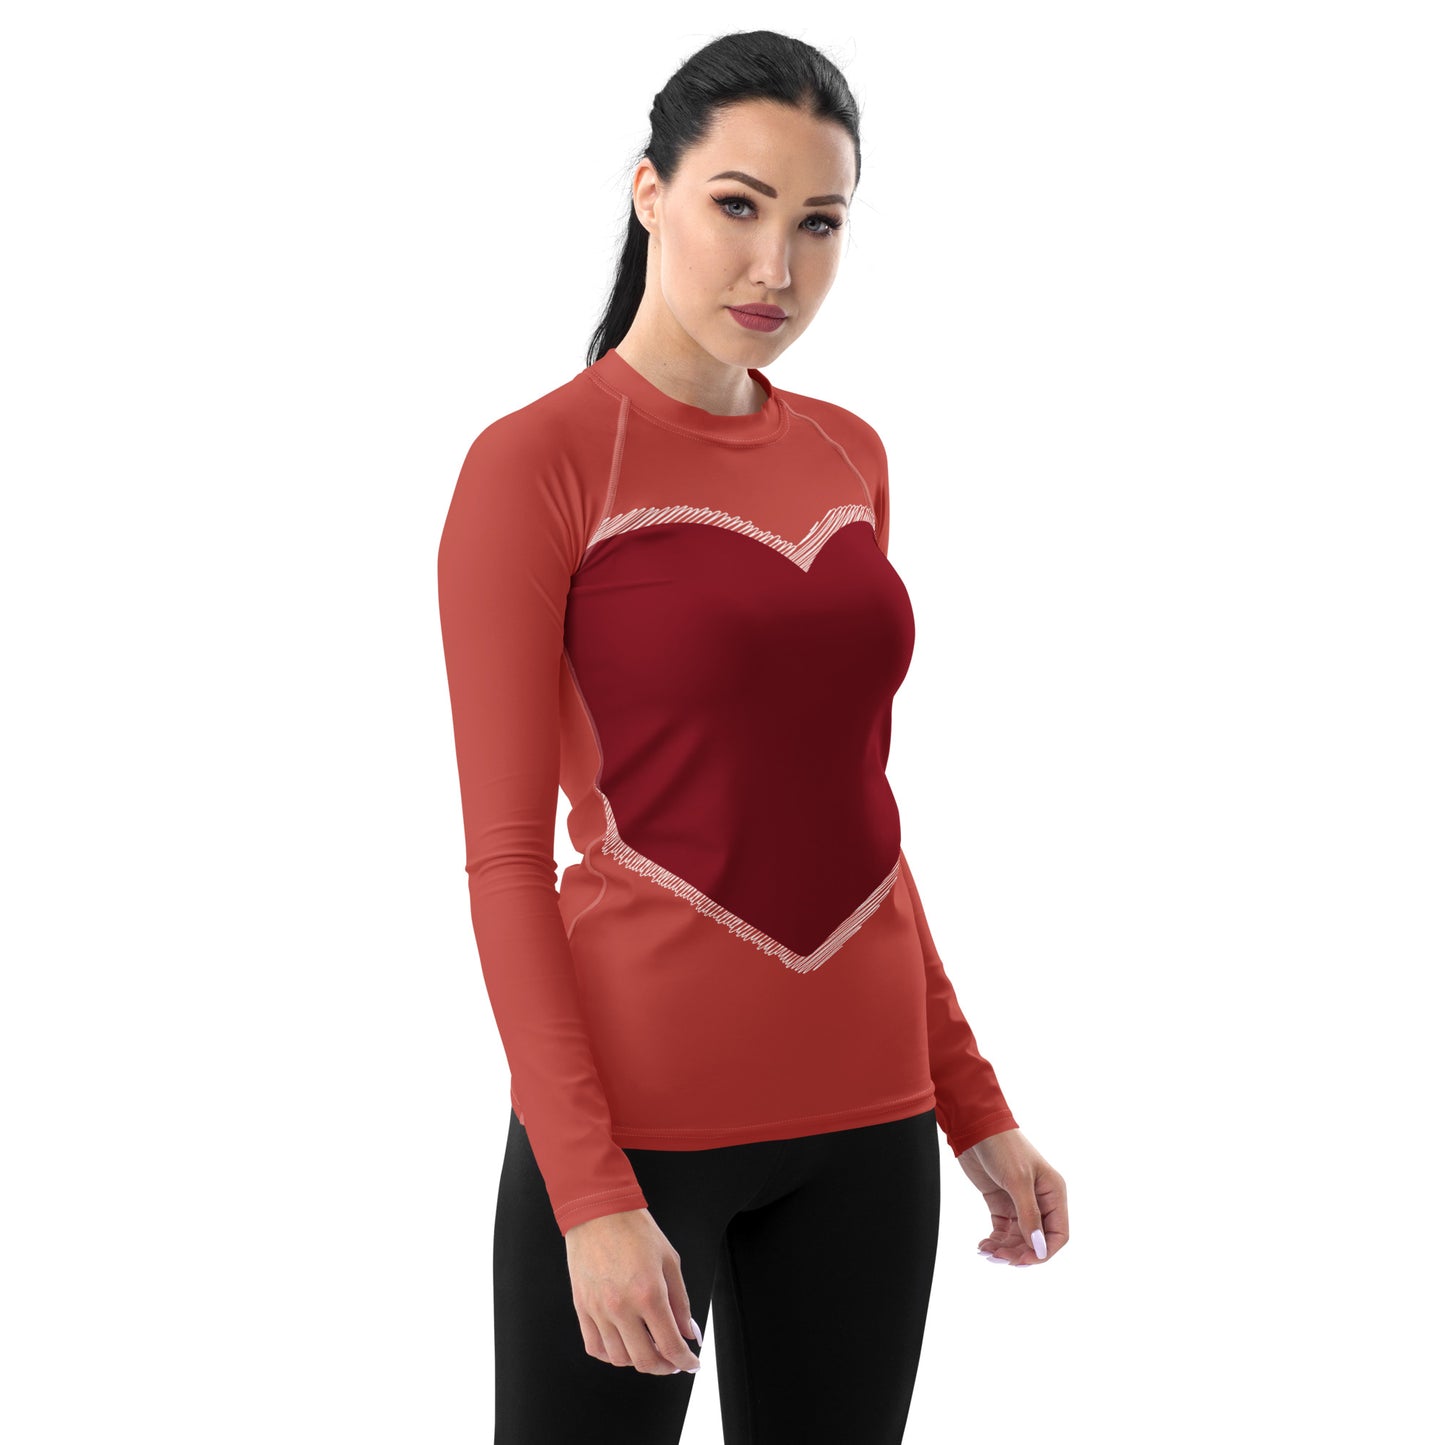 Heart - Inspired By Taylor Swift - Sustainably Made Women's Rash Guard